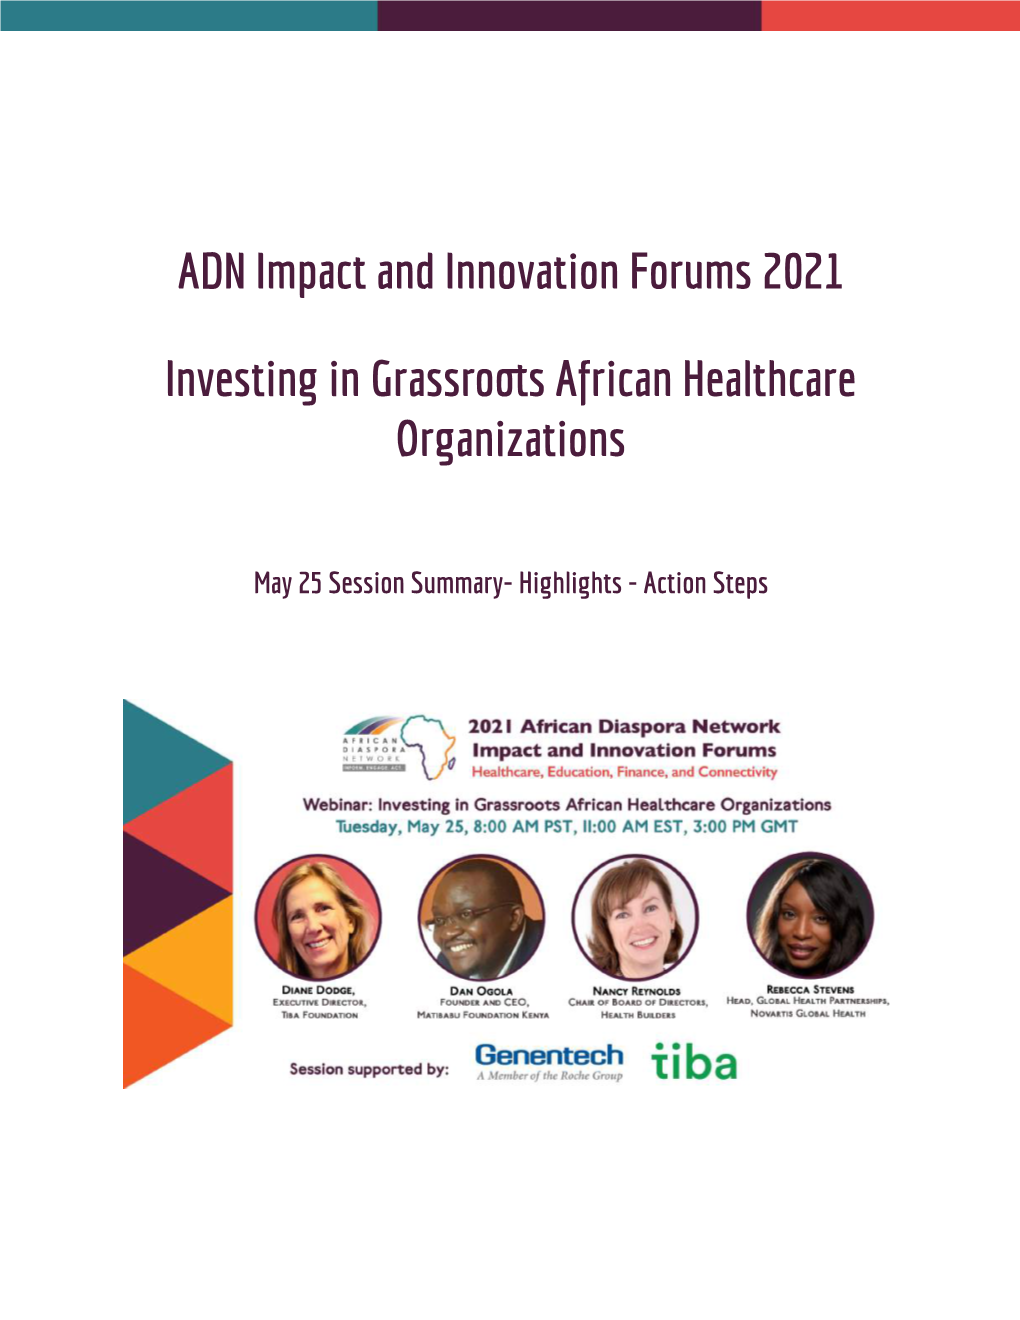 Investing in Grassroots African Healthcare Organizations.'